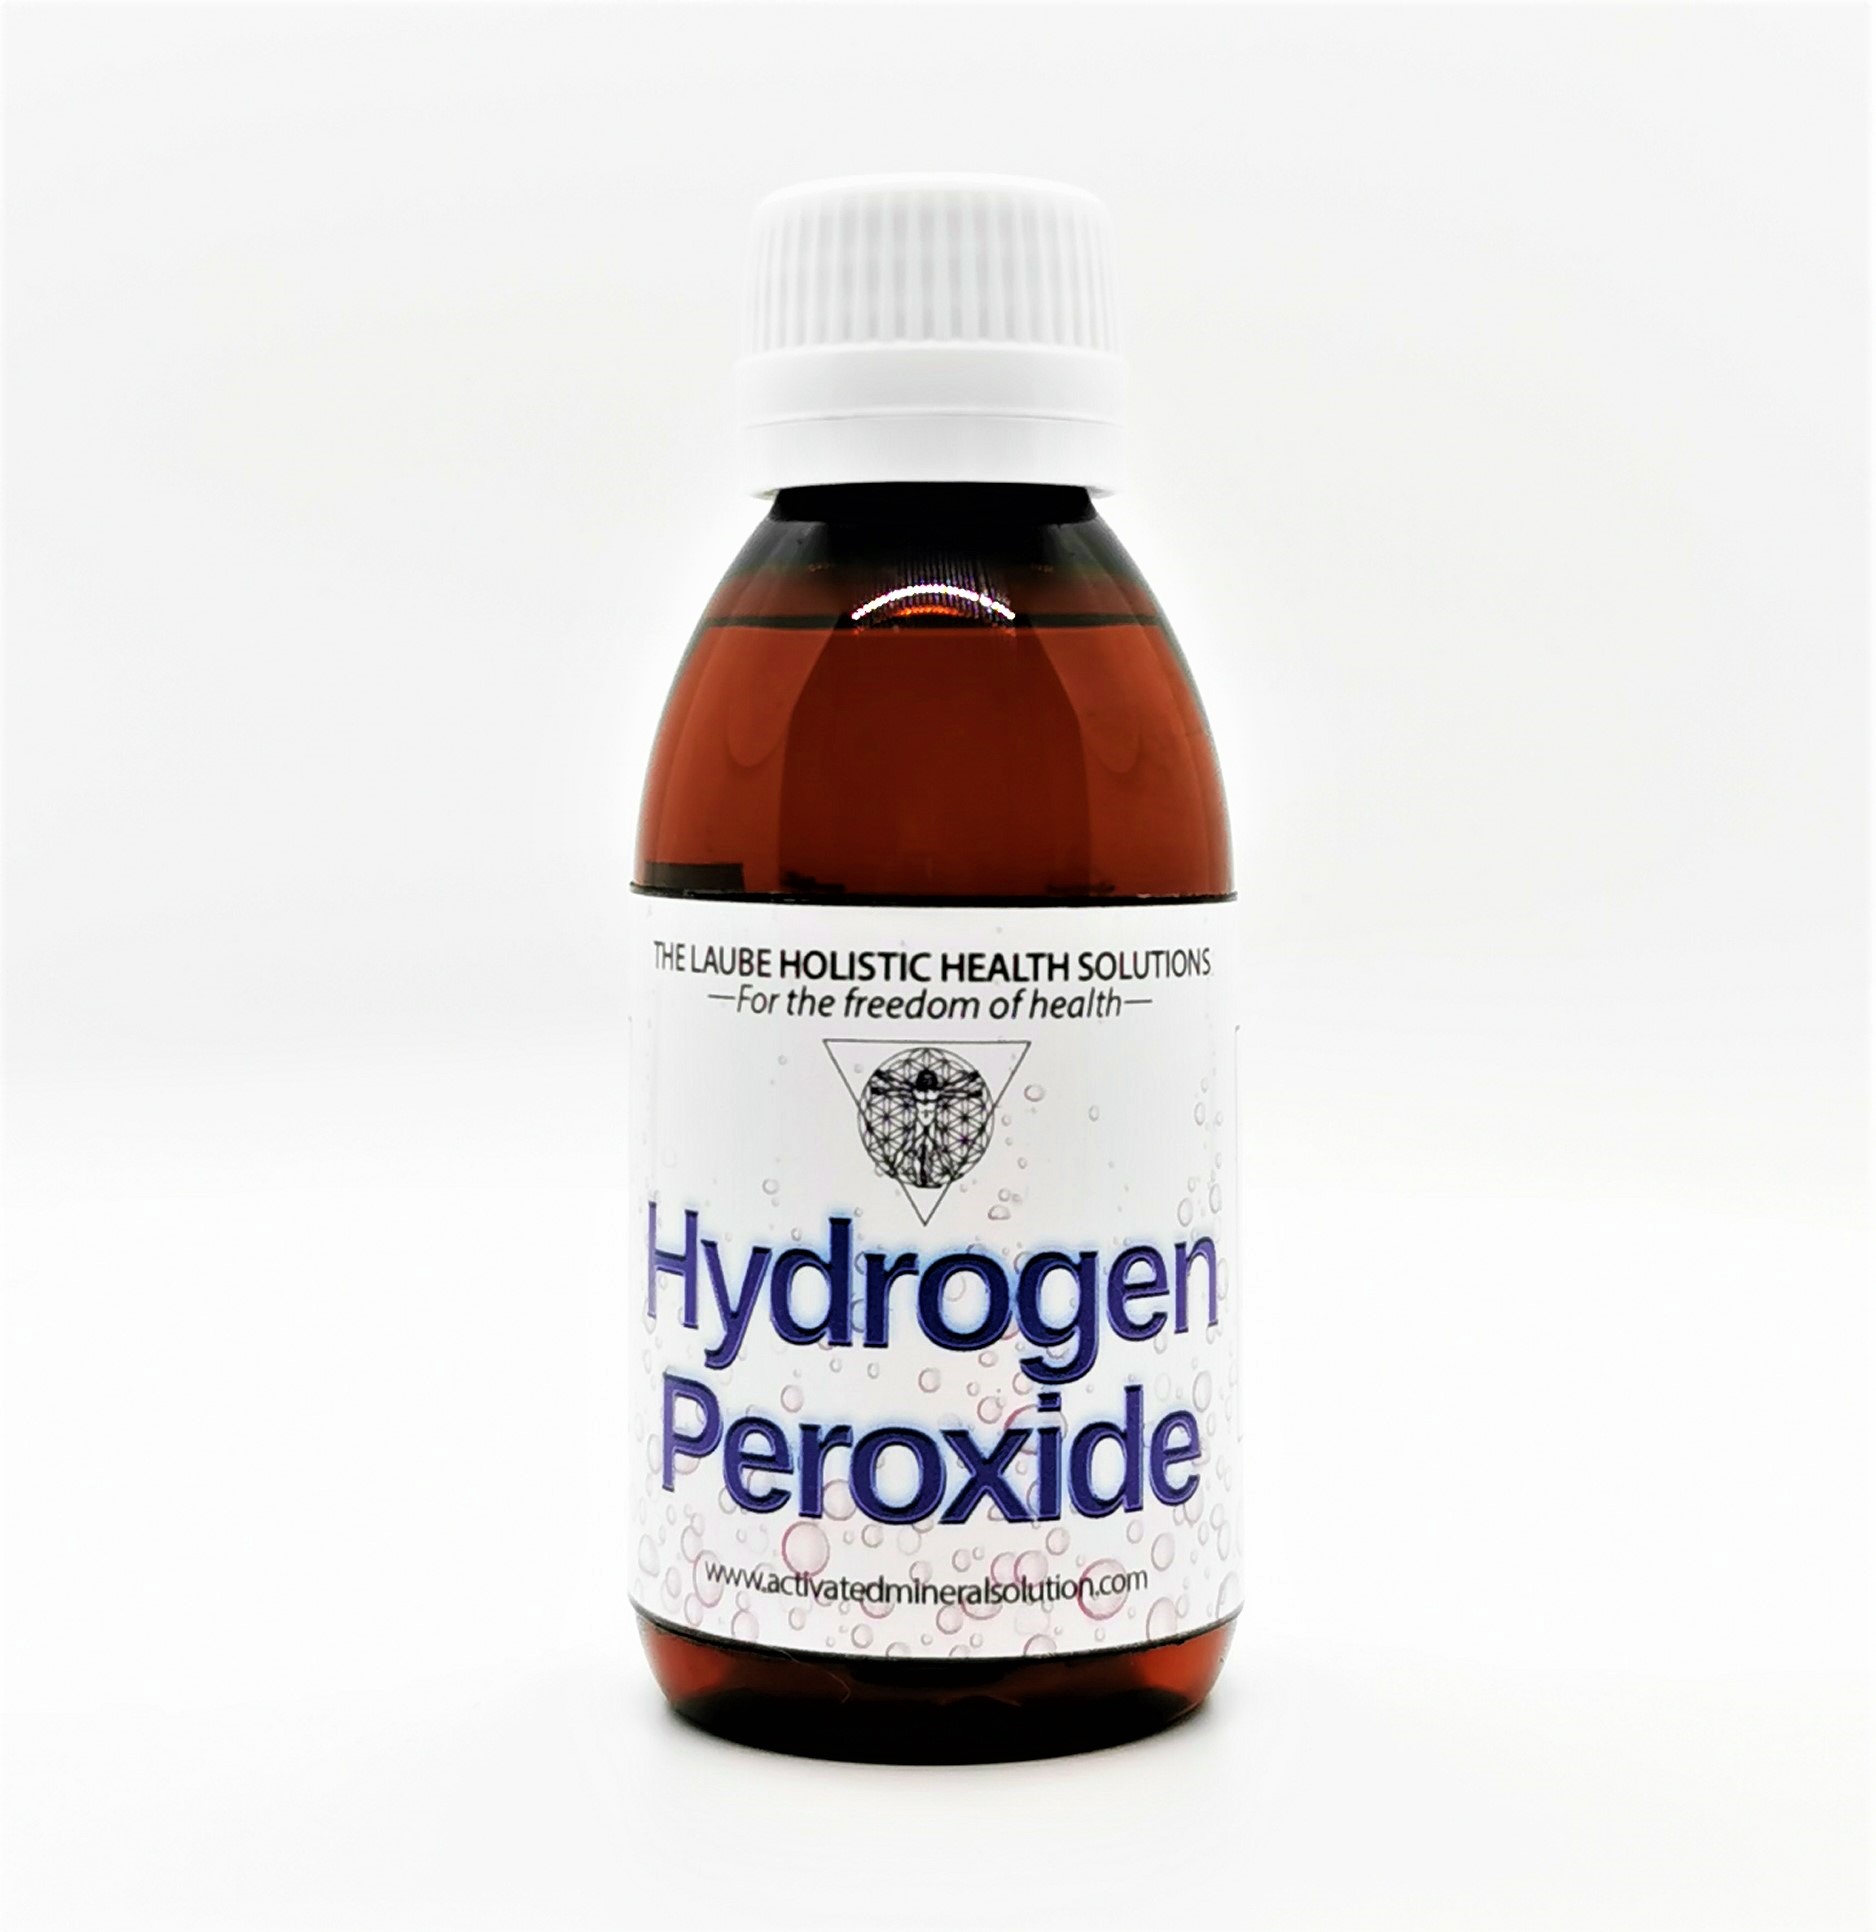 true power of hydrogen peroxide by mary wright one minute cure by madison cavanaugh